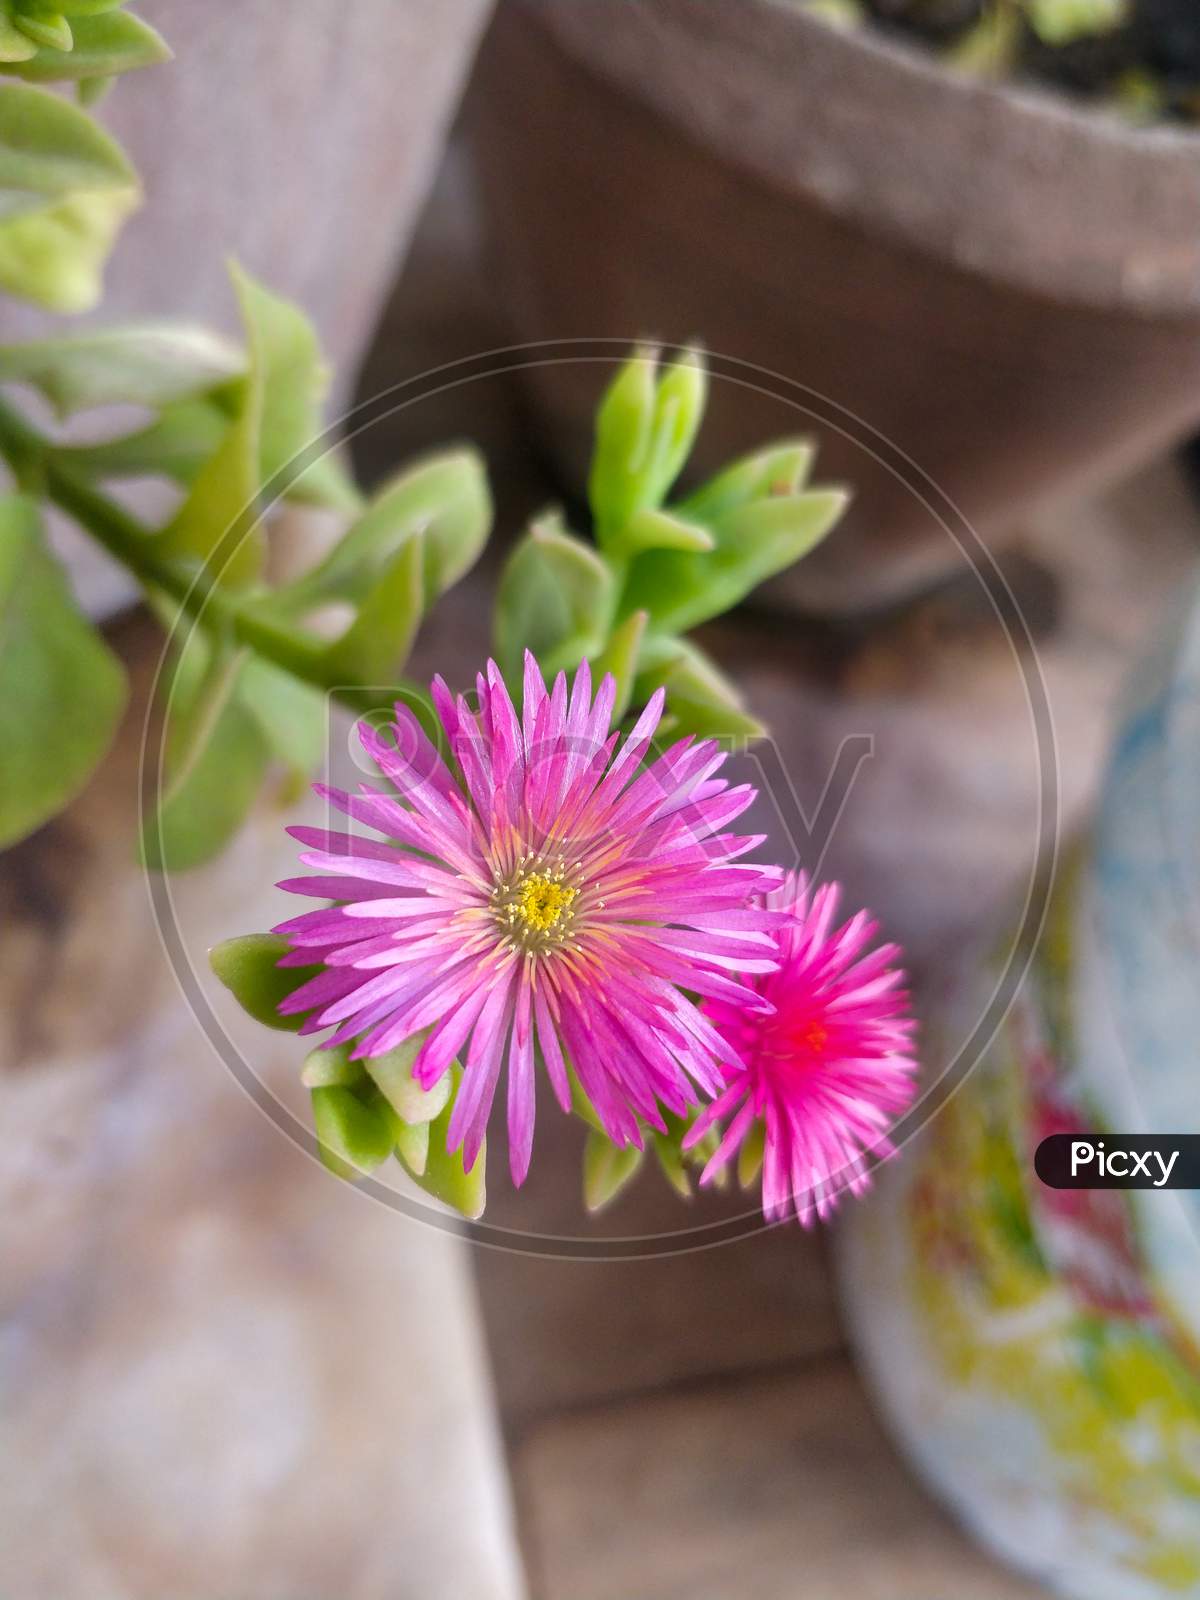 Baby Sun Rose, heart leaf plant, ice plant family